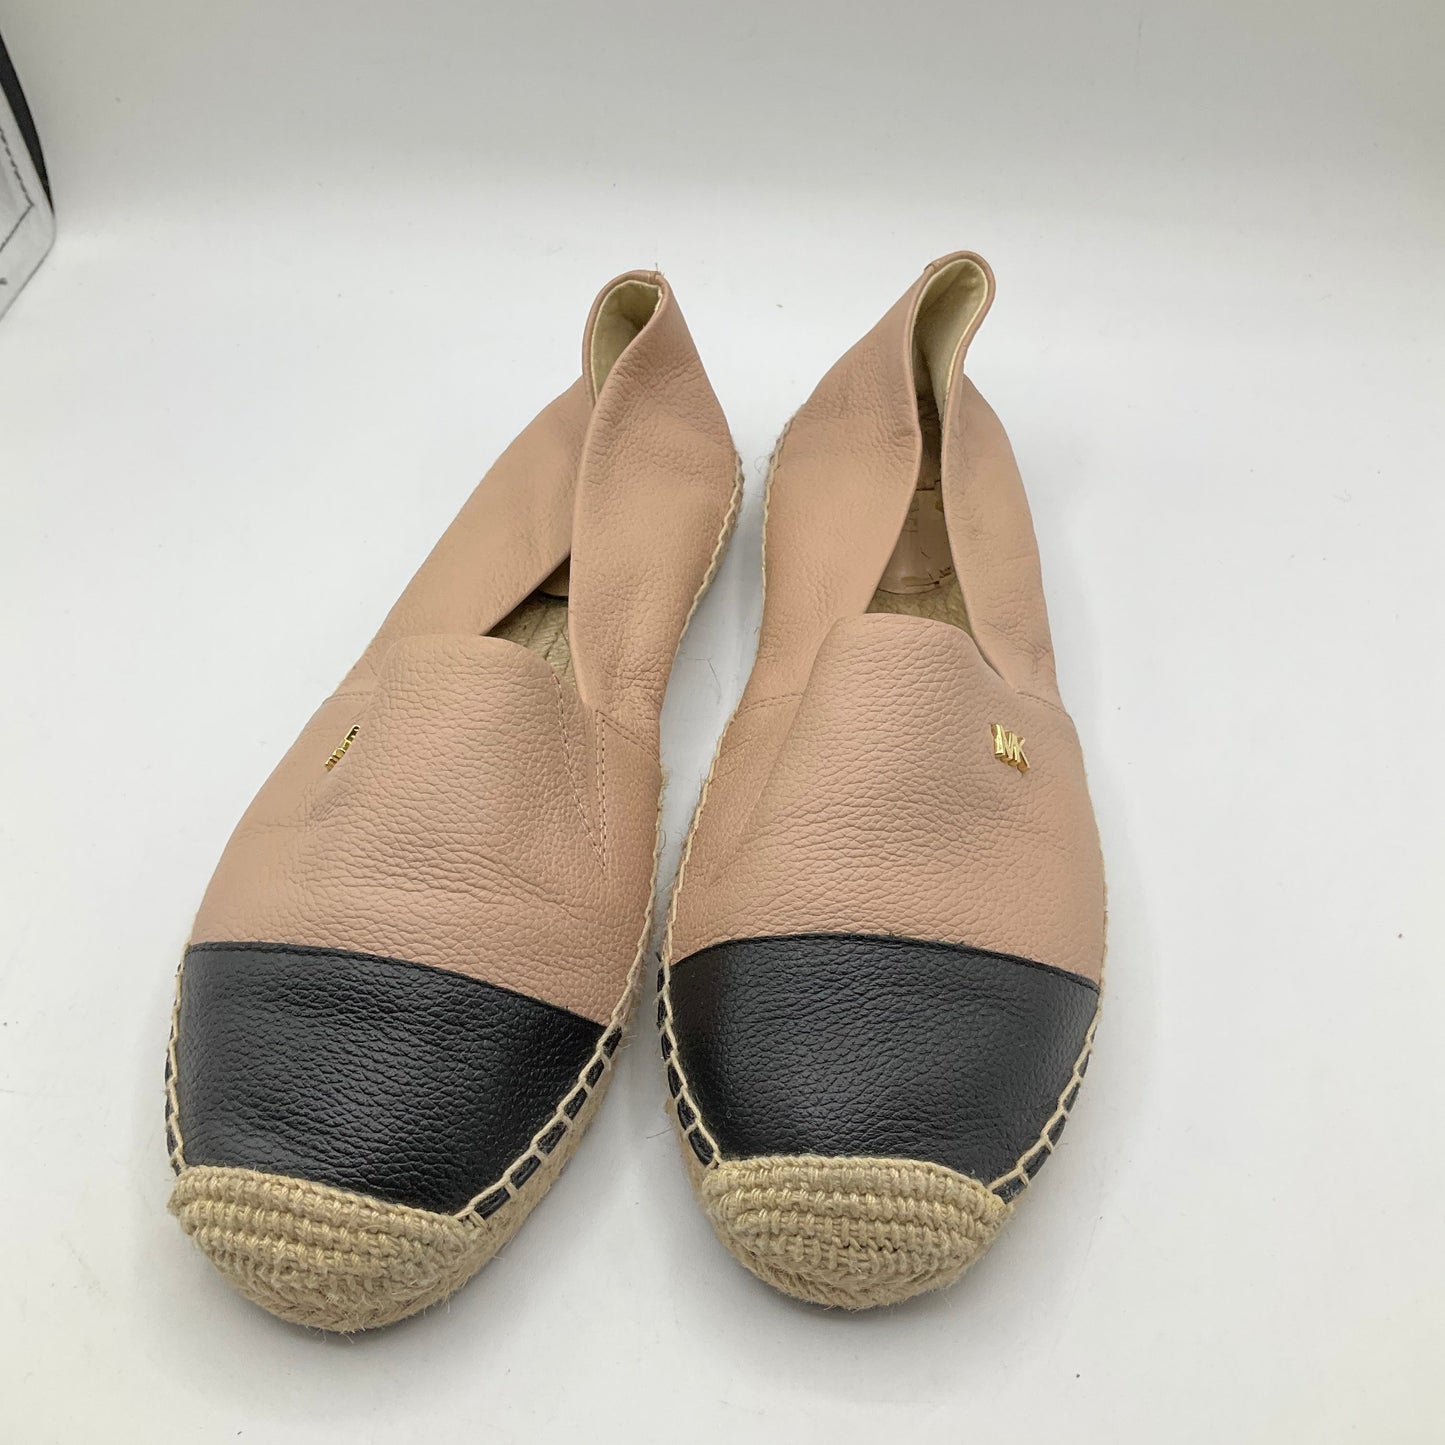 Taupe Shoes Flats Michael By Michael Kors, Size 7.5